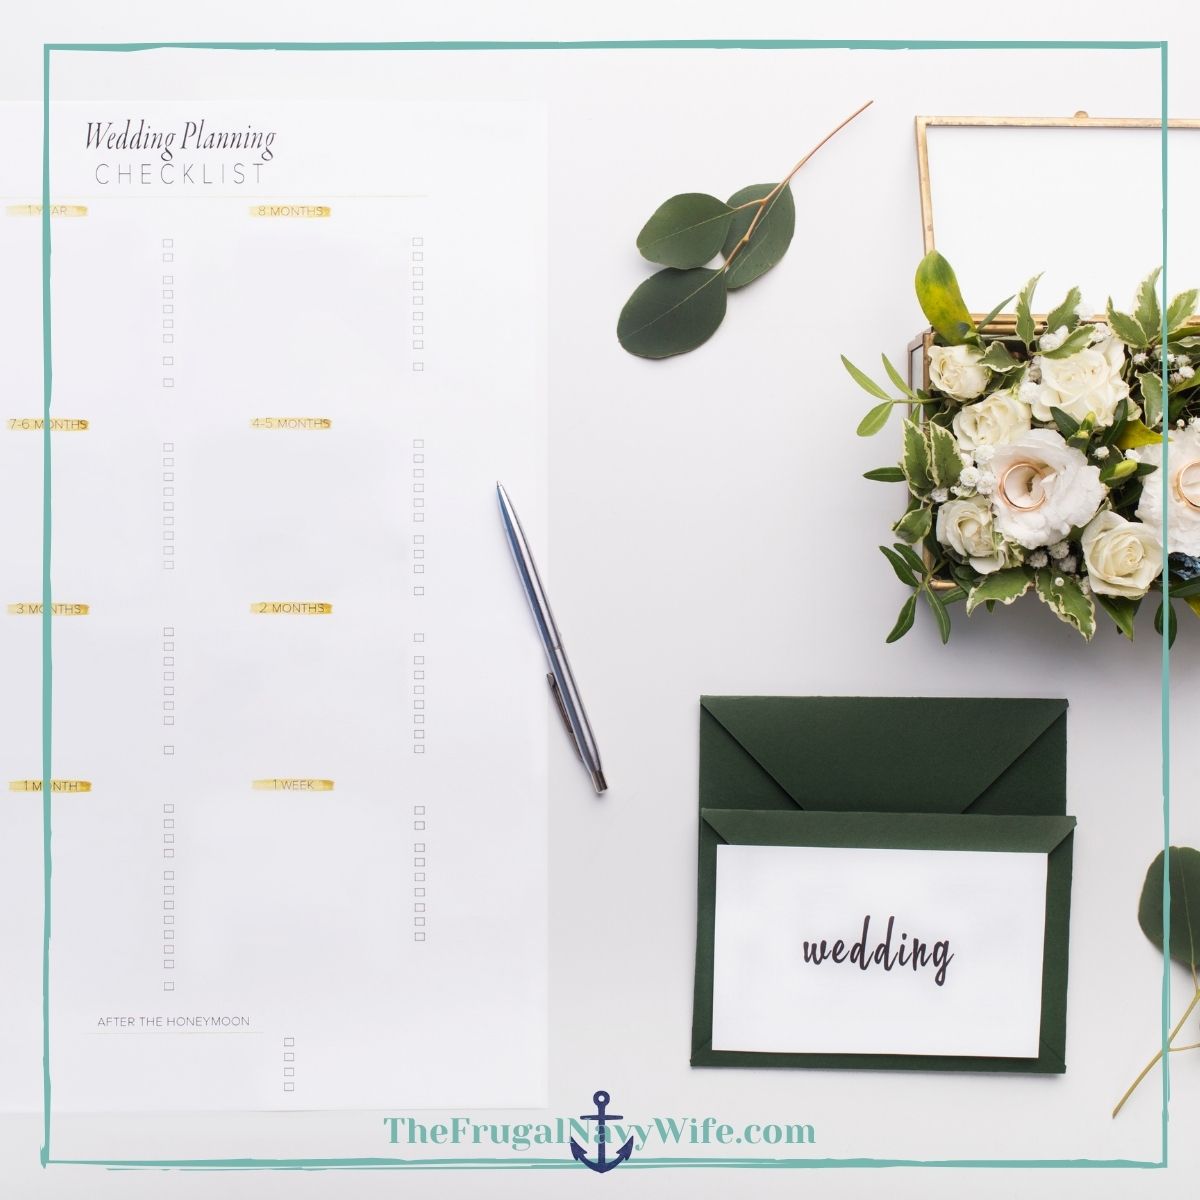 HUGE List of Free Wedding Samples for Brides The Frugal Navy Wife